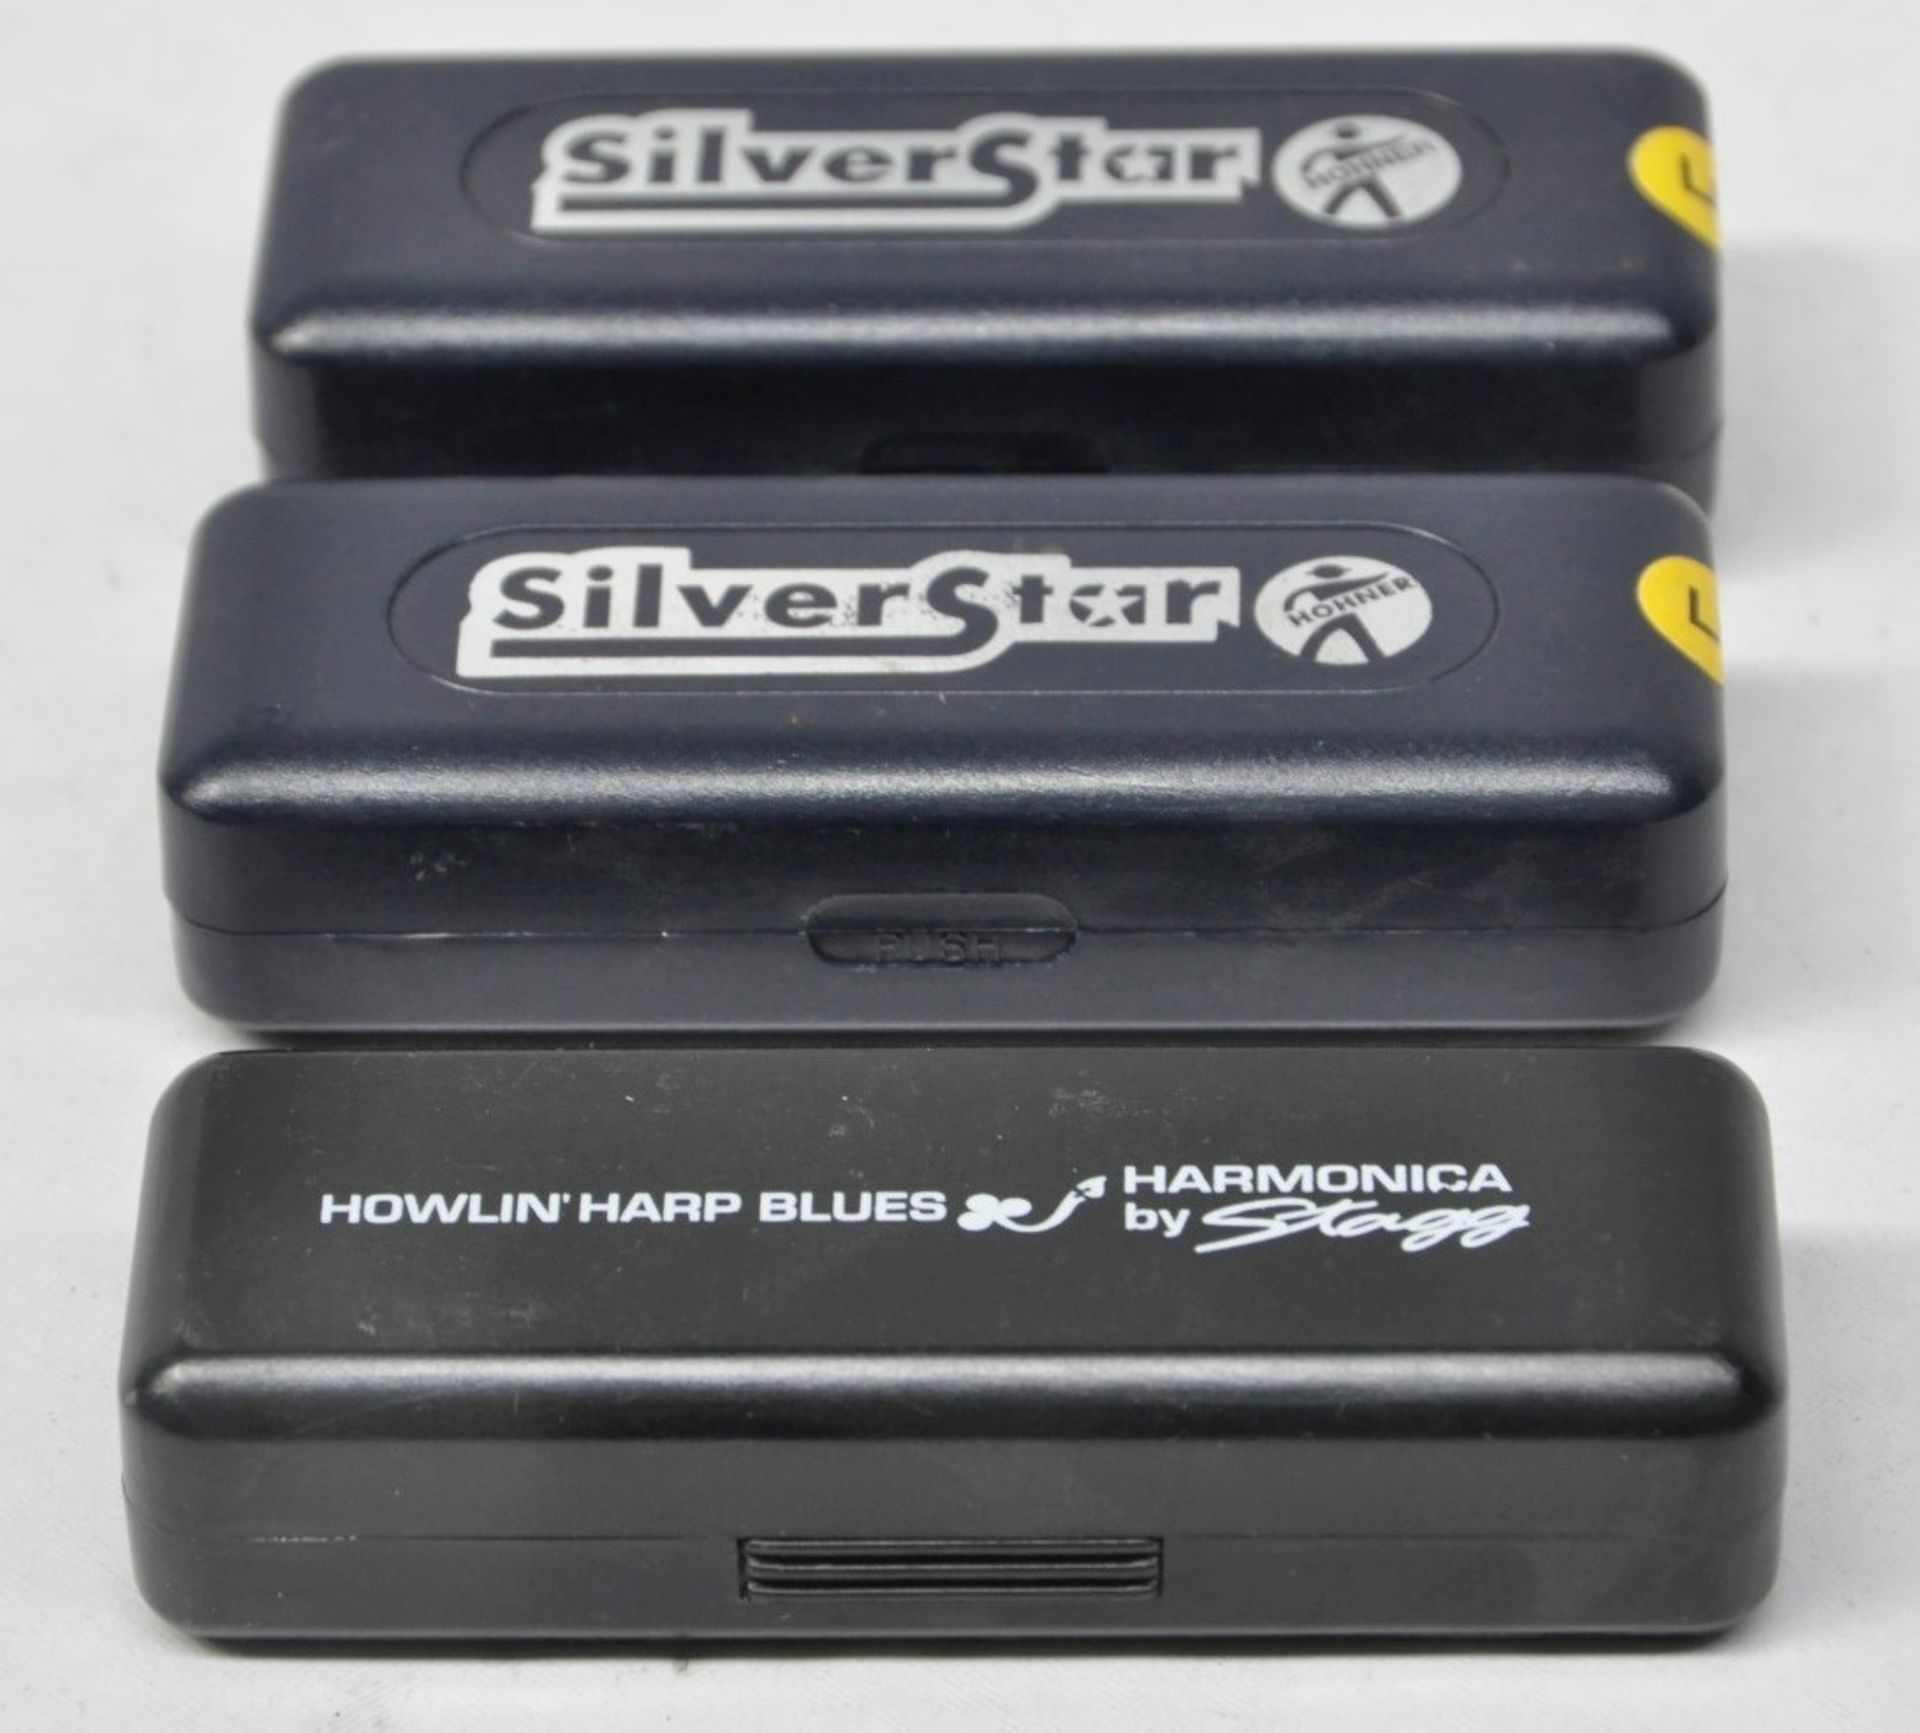 3 x Harmonicas Includes Hohner Silverstar and Stagg Howlin Harp Blues - CL020 - With Cases -